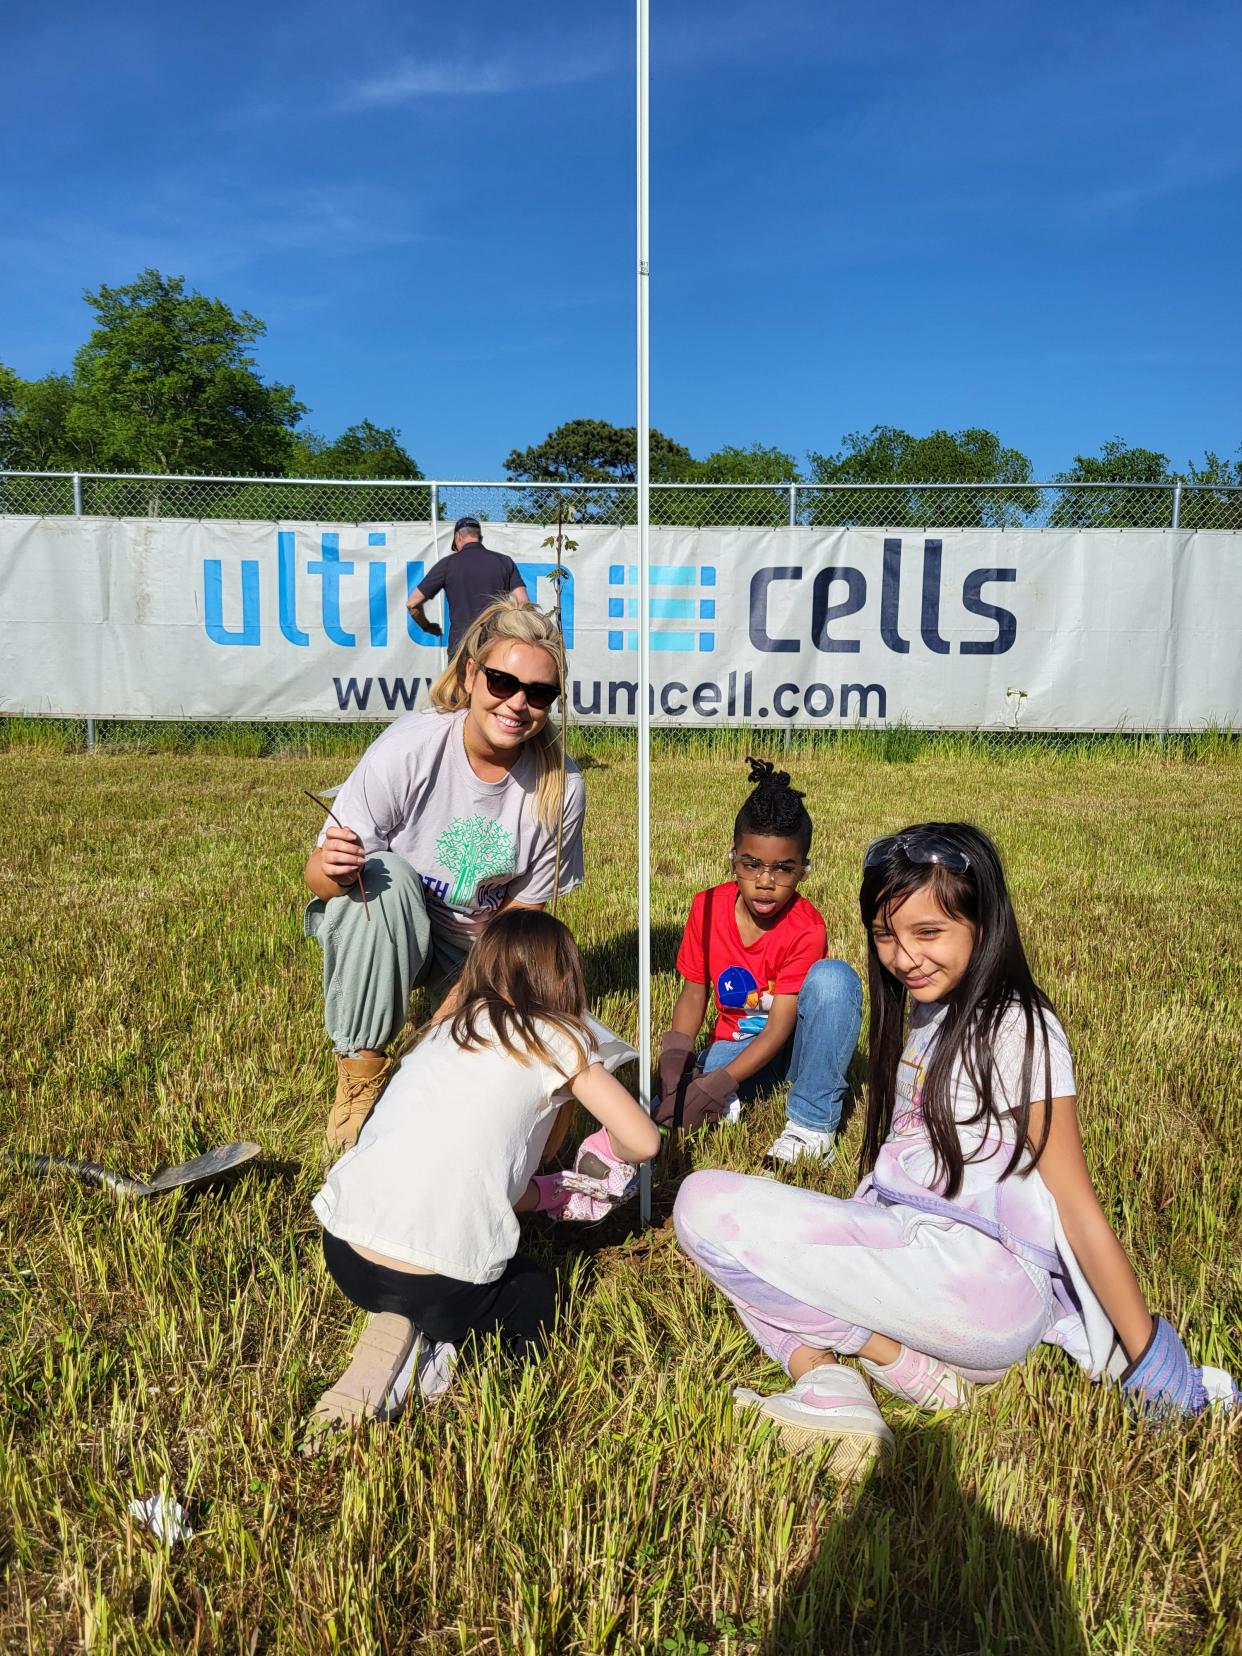 To celebrate Earth Day this year, Ultium Cells, their trade partners, and children from the Boys and Girls Club of South Central Tennessee planted trees around the 2.8 million square foot battery cell plant.